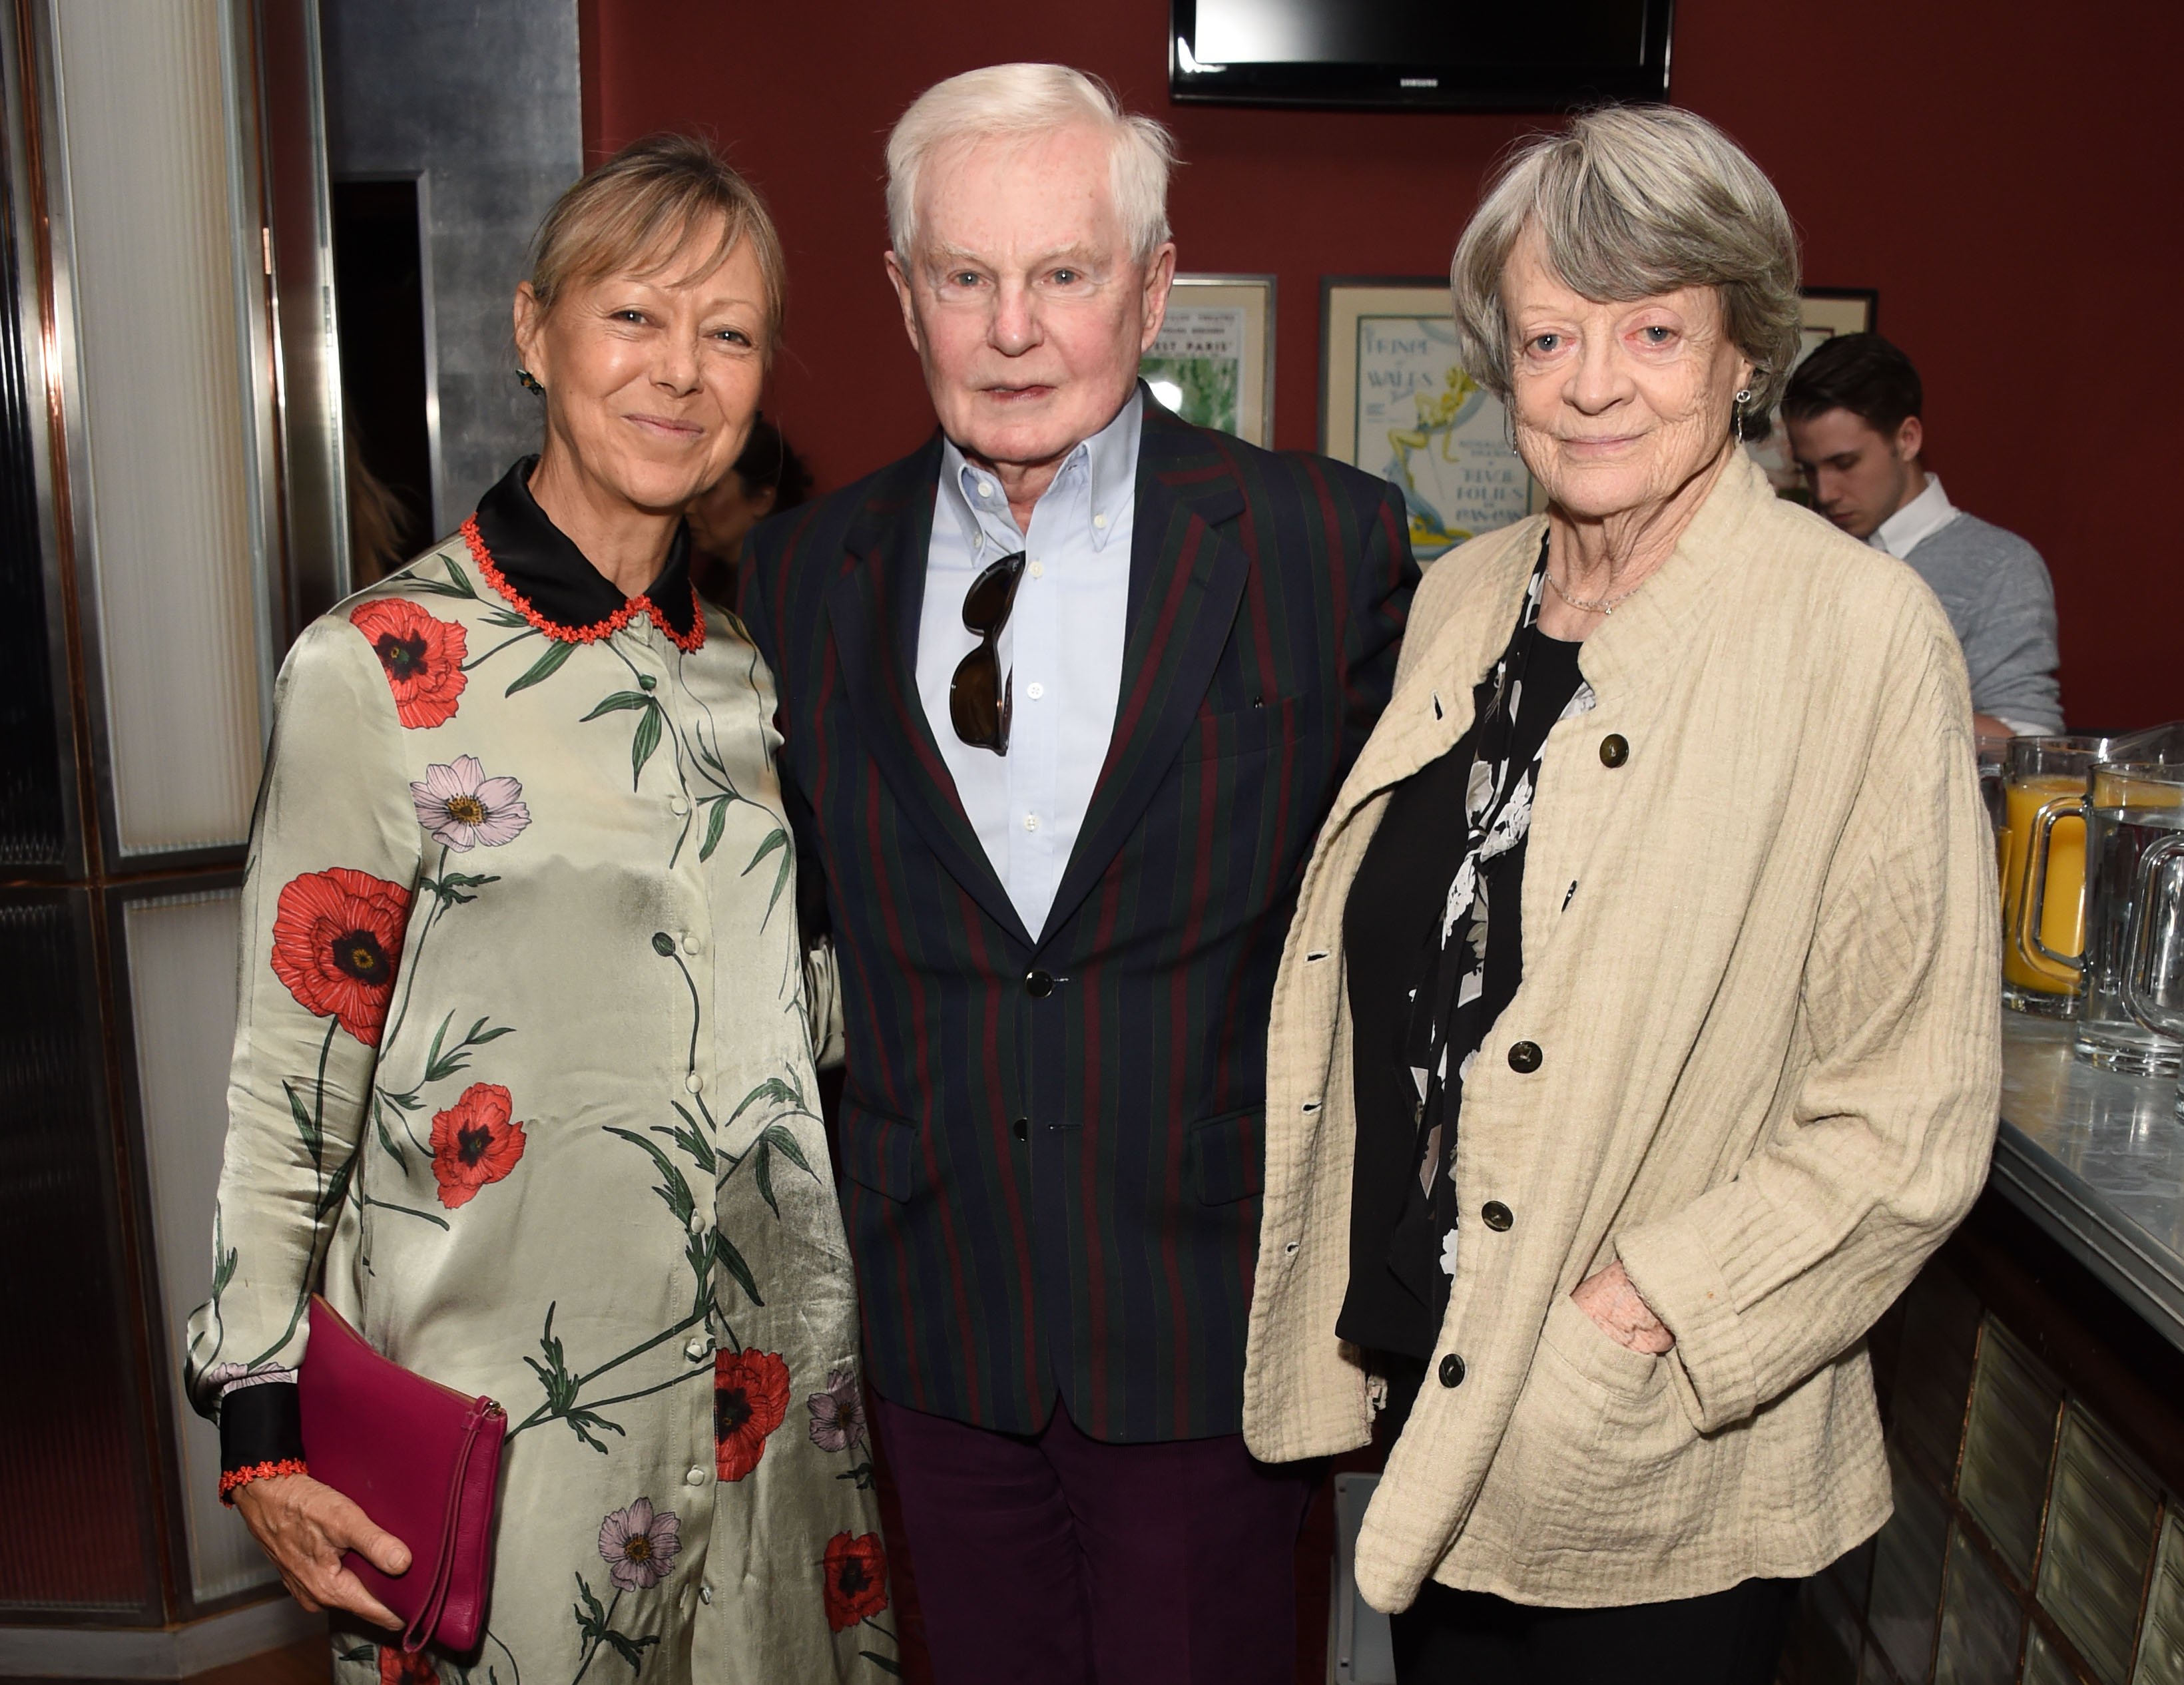 Jenny Agutter, Derek Jacobi, and Maggie Smith at the Acting for Others Golden Bucket Awards at The Prince of Wales Theatre on May 4, 2018 in London, England. | Source: Getty Images